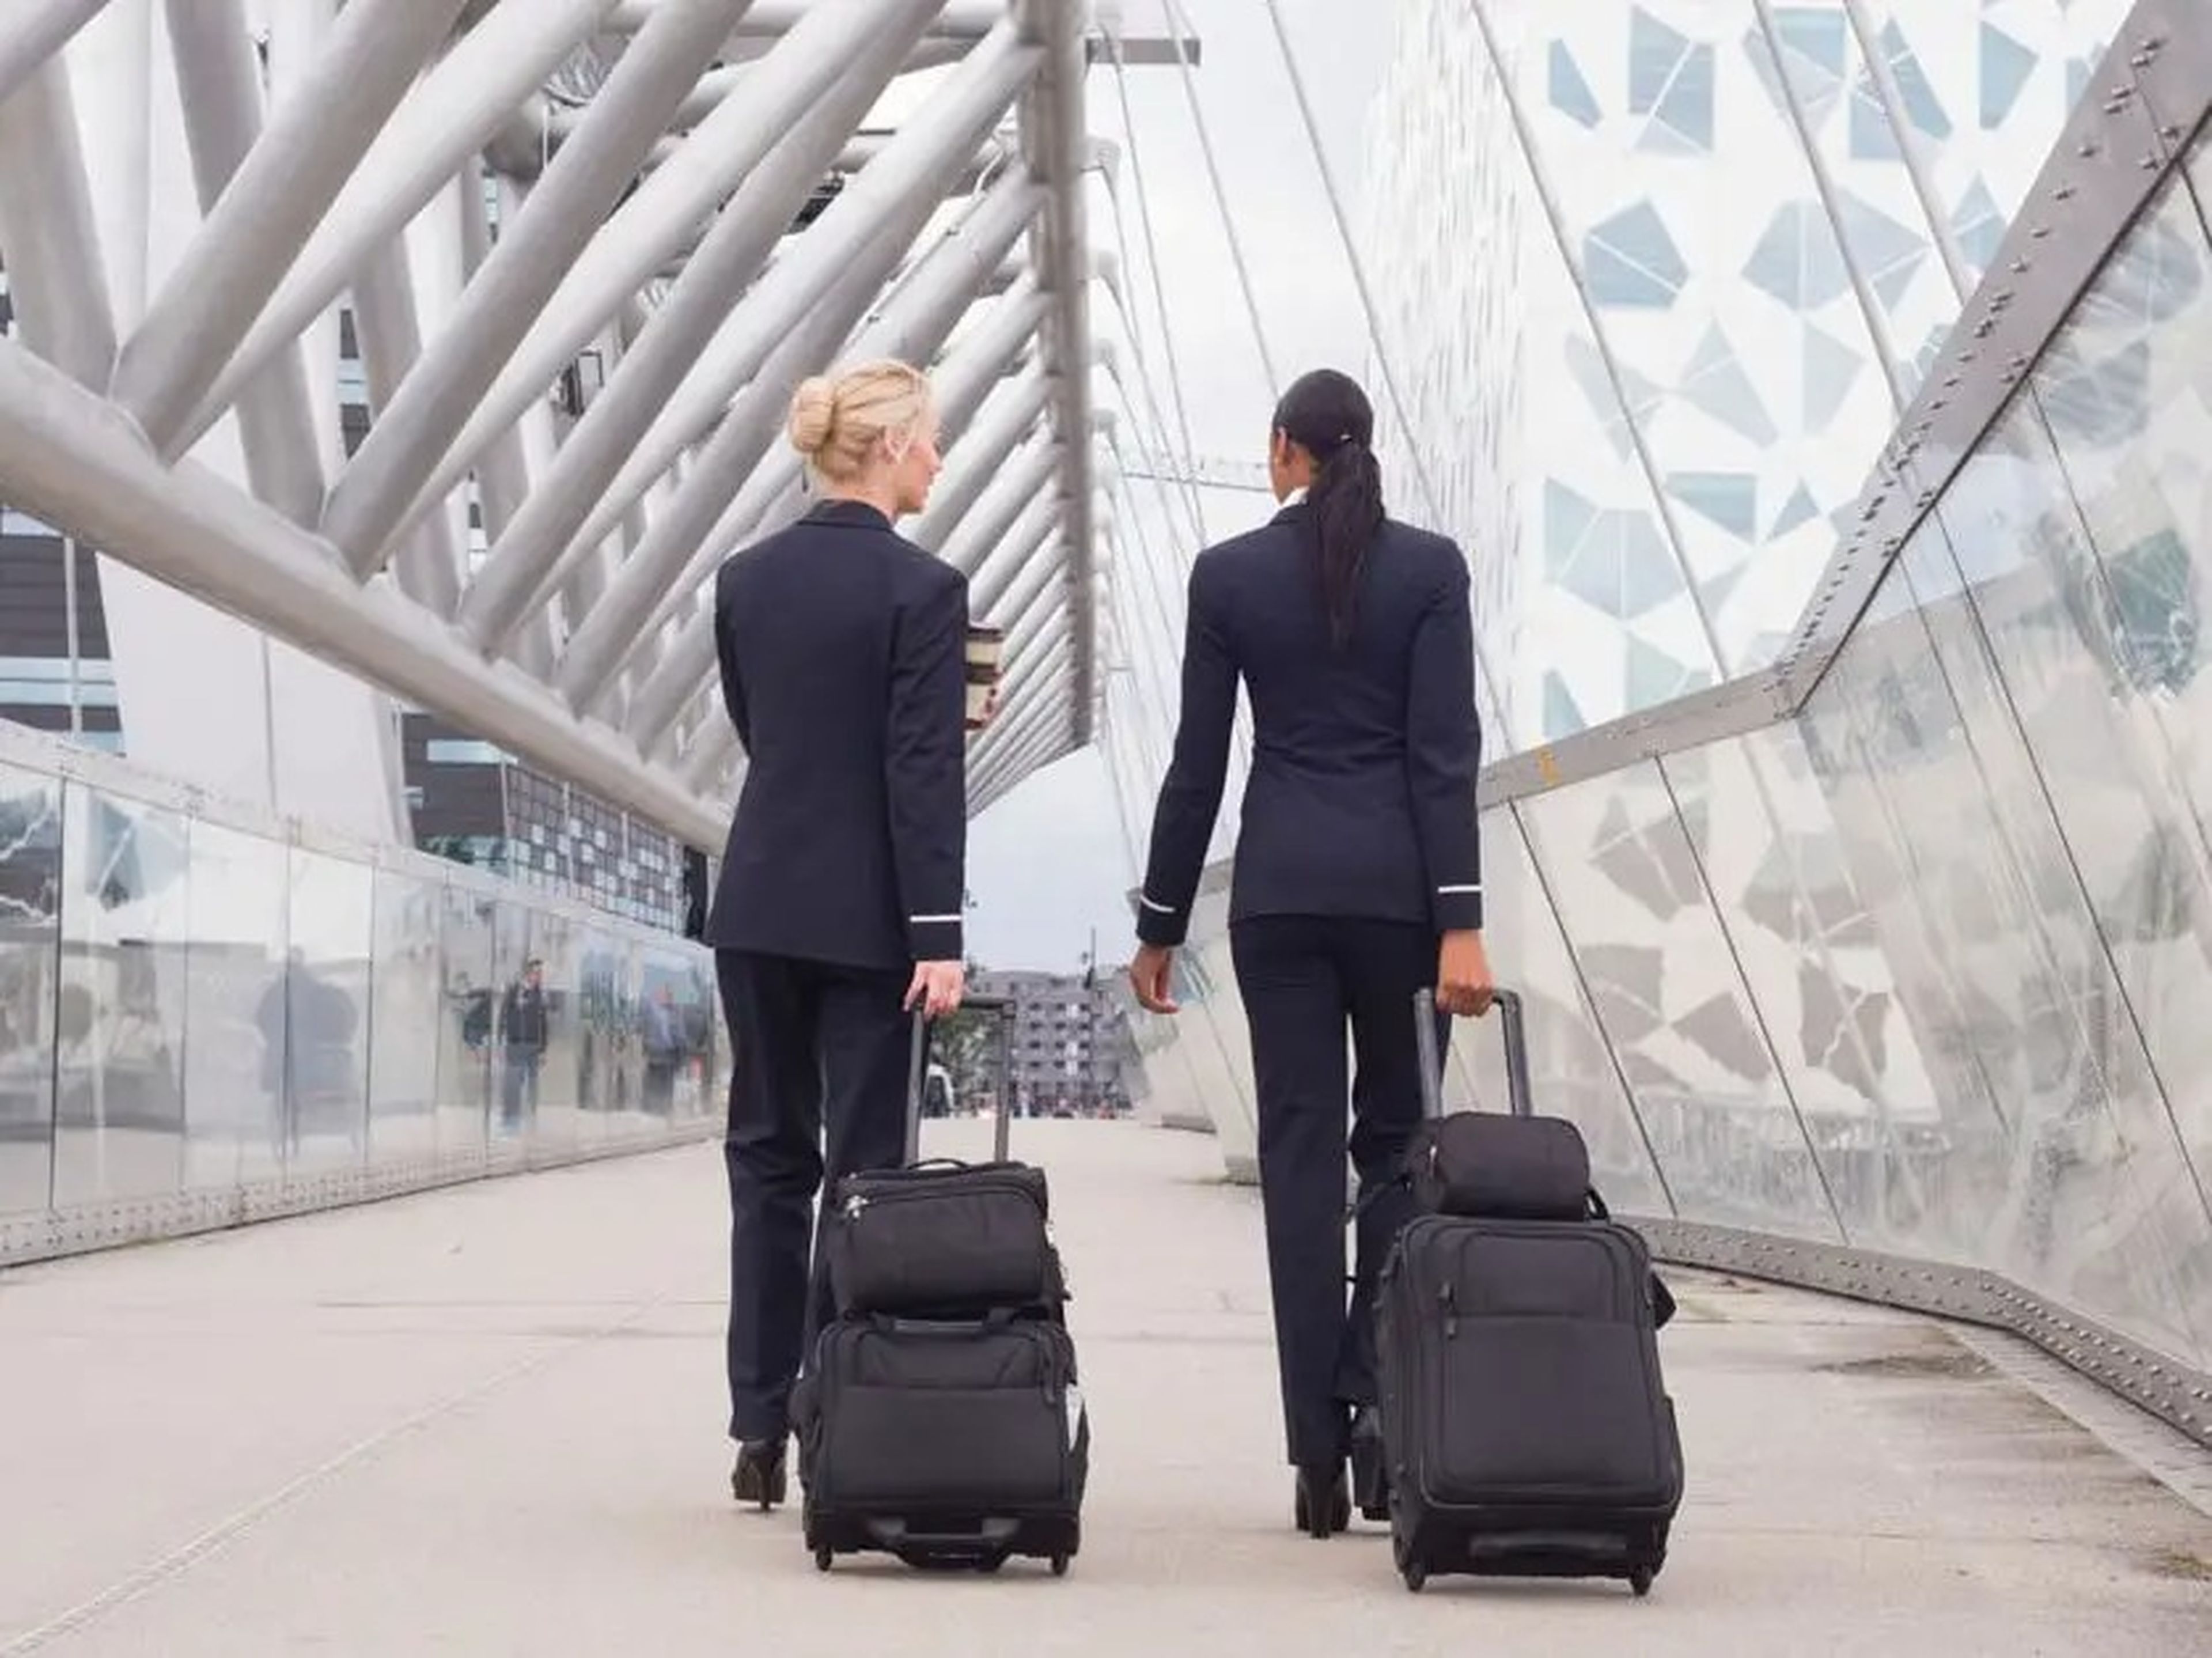 Two feminine flight attendants walking in the airport with suitcases